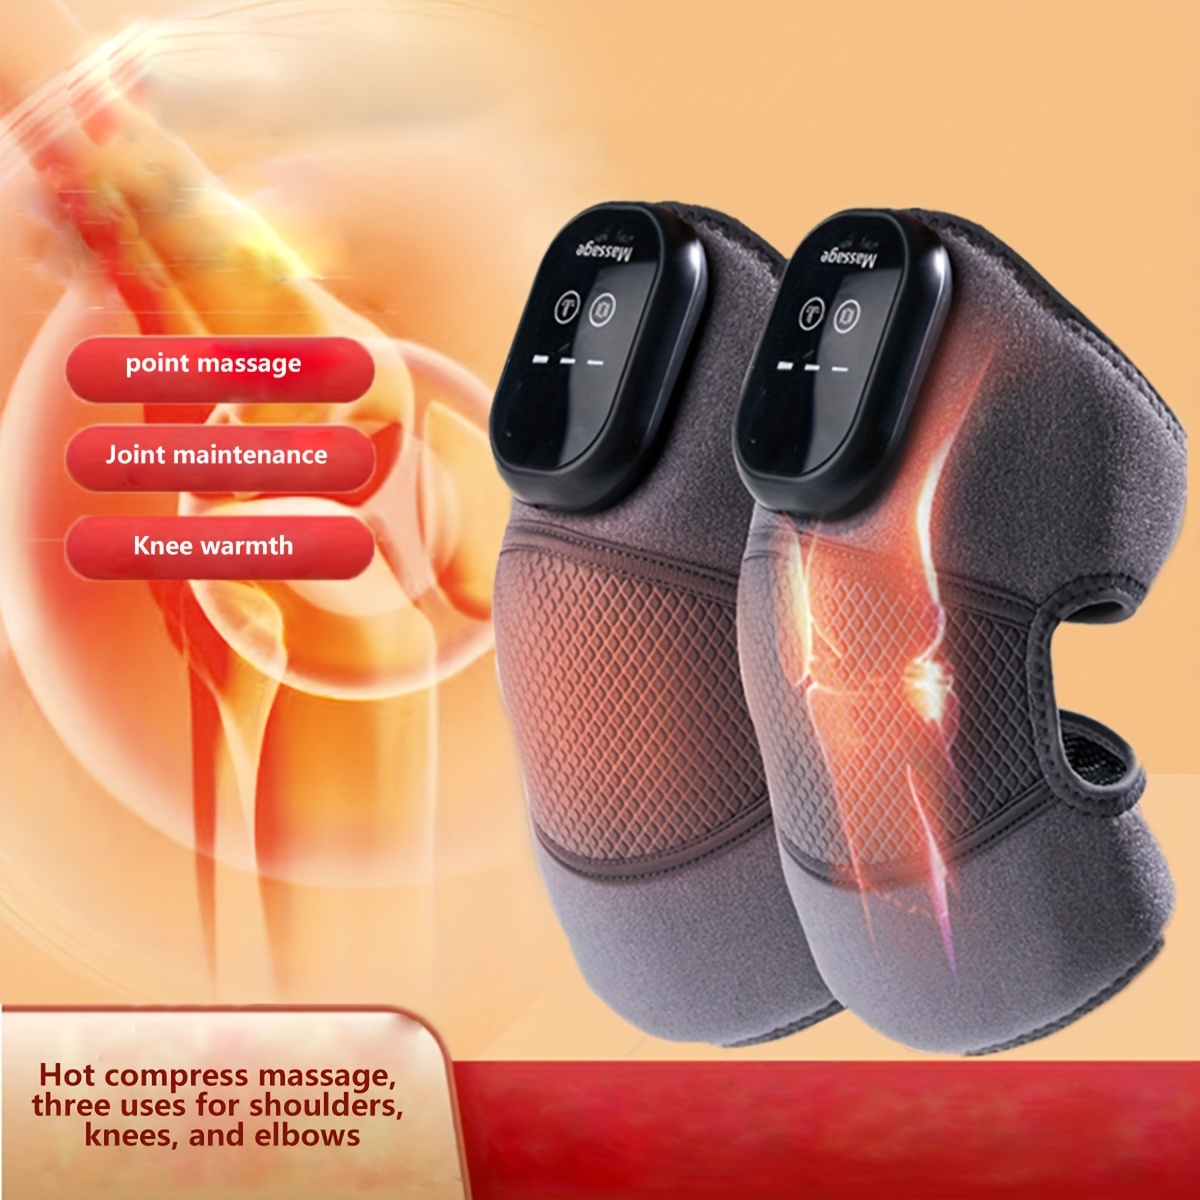 R A Products Vibration Knee Massagers knee belt electric. belt knee  Vibration Knee Massagers Massager - R A Products 